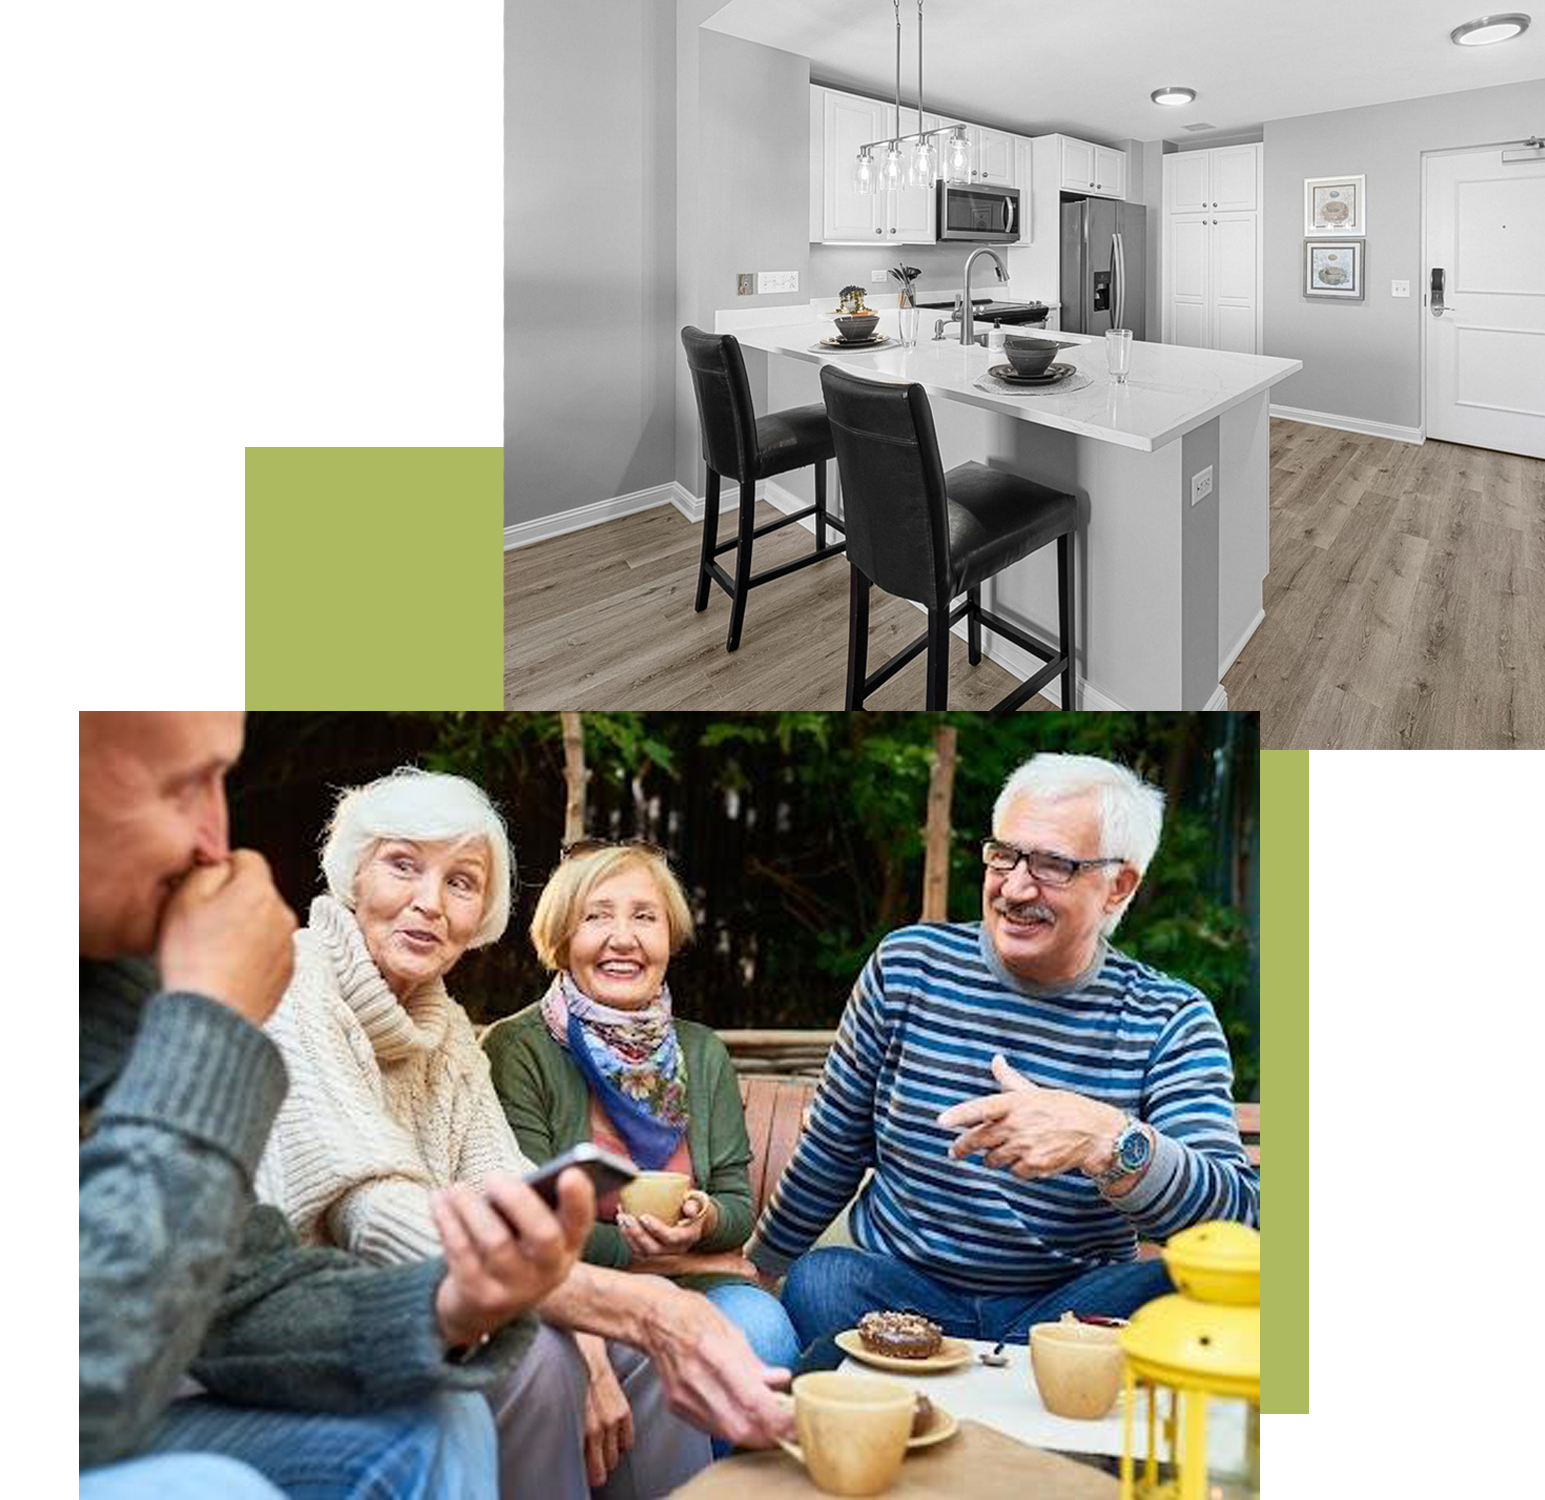 Independent Living Collage Image with apartment and friends